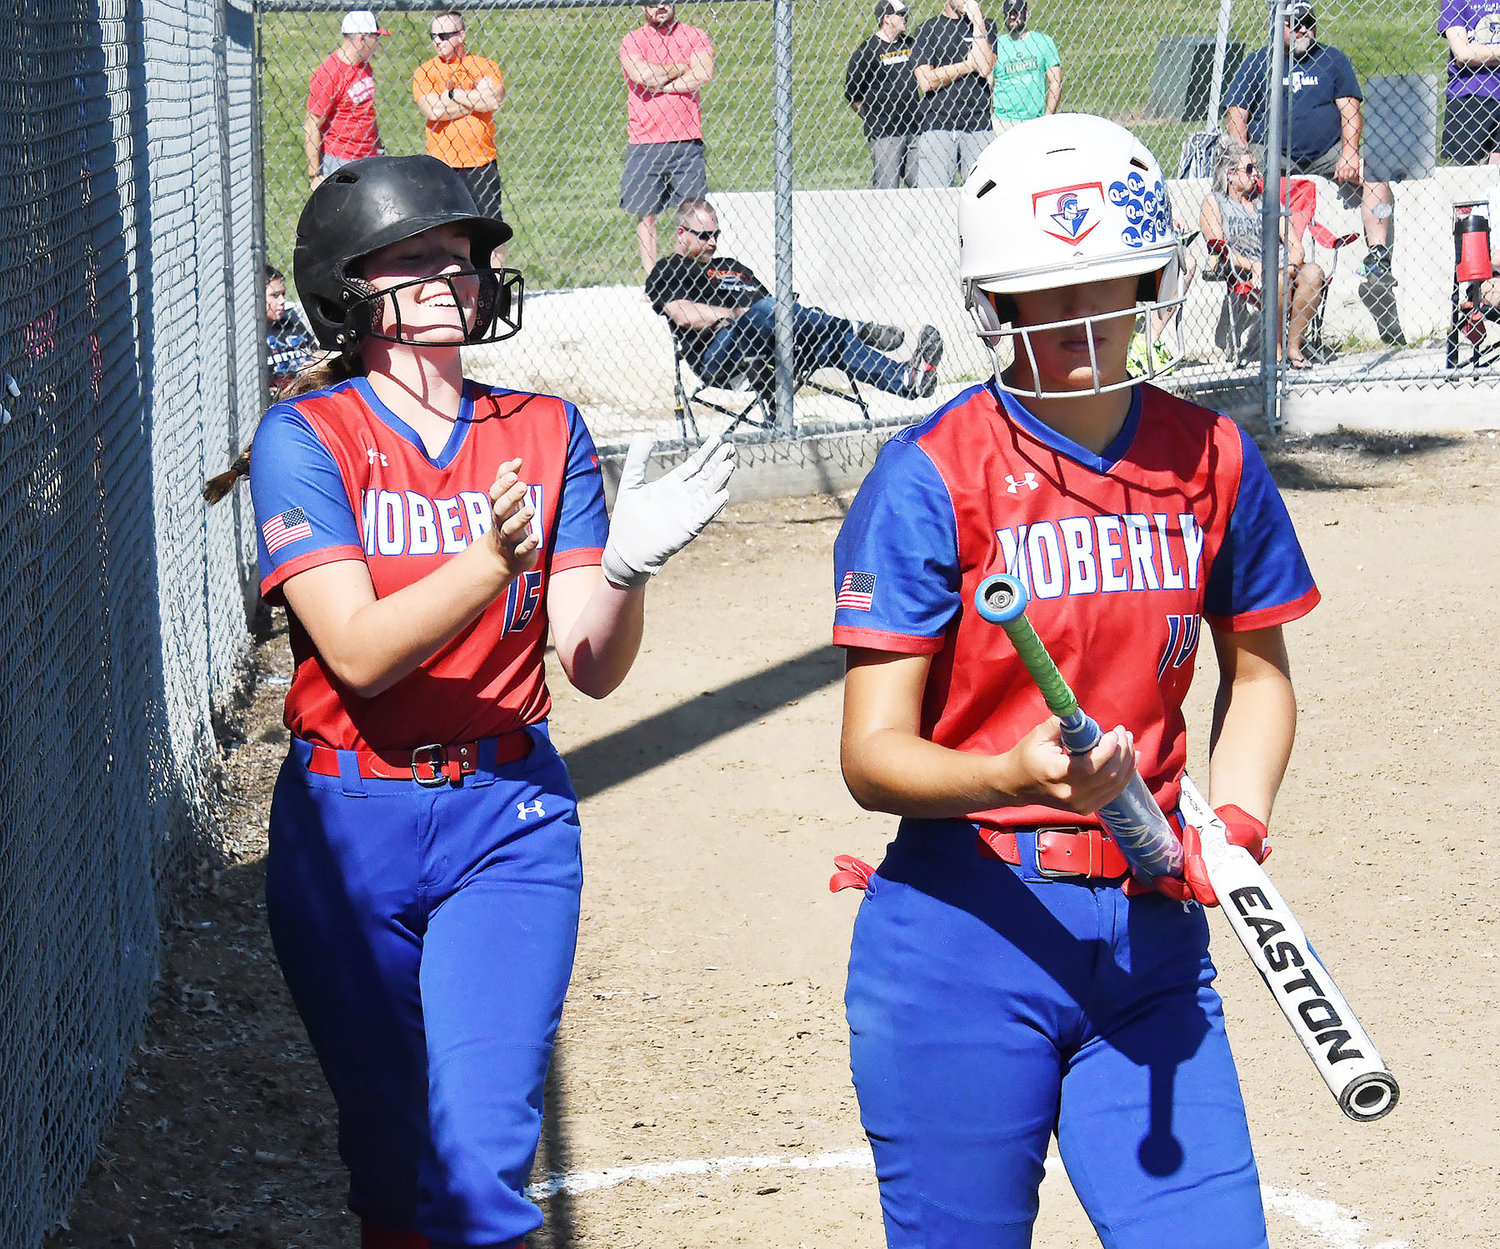 Hannah Ramsey smiles and claps after scoring a run for the Spartans. Chloe Ferguson also is photographed, at right.